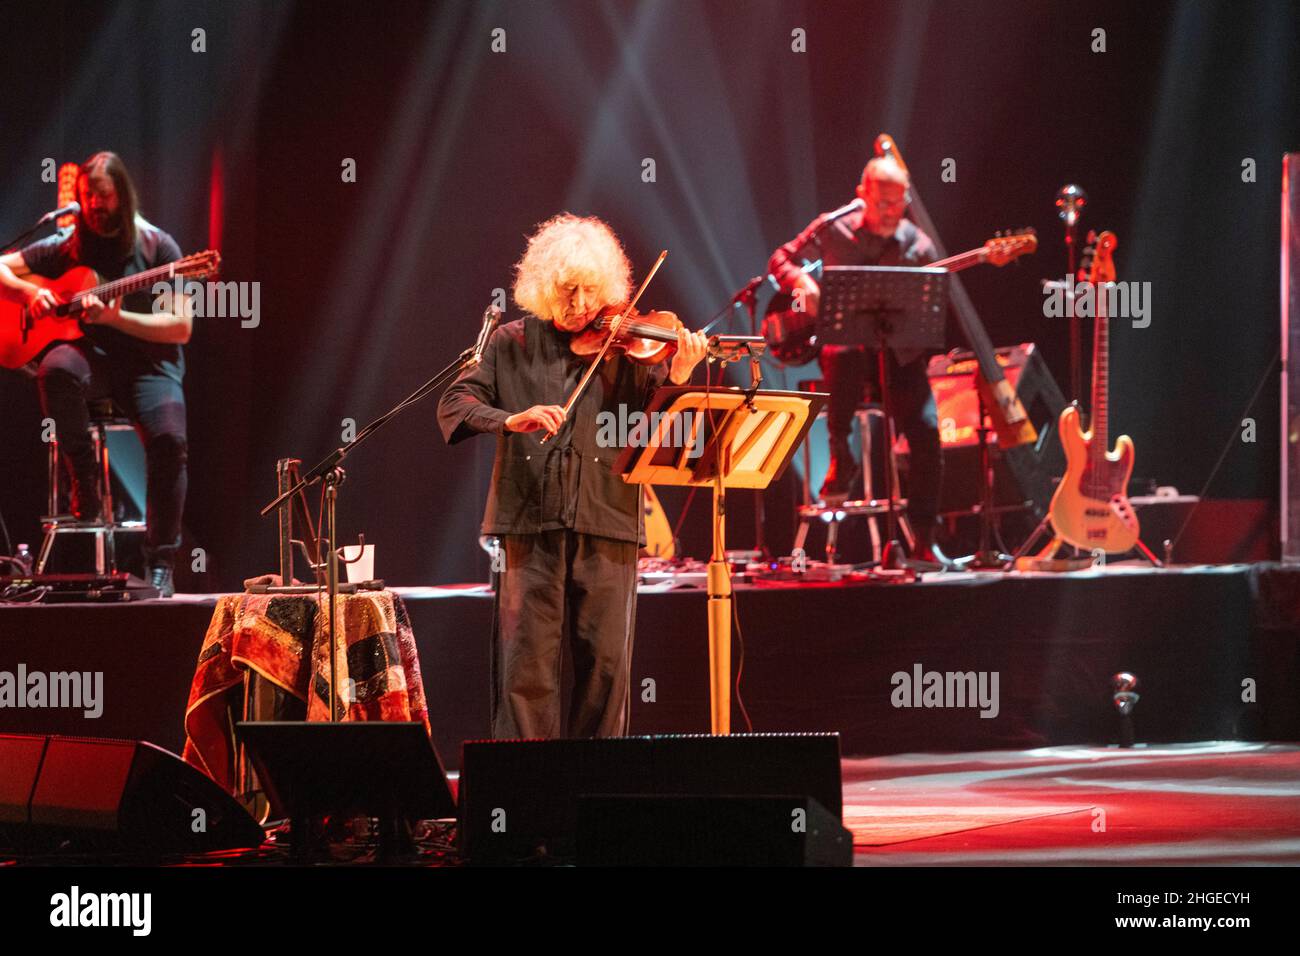 Italian singer and violonist Angelo Branduardi in concert “il cammino dell’anima tour” at Teatro Colosseo on January 19, 2021 in Turin, Italy. Stock Photo